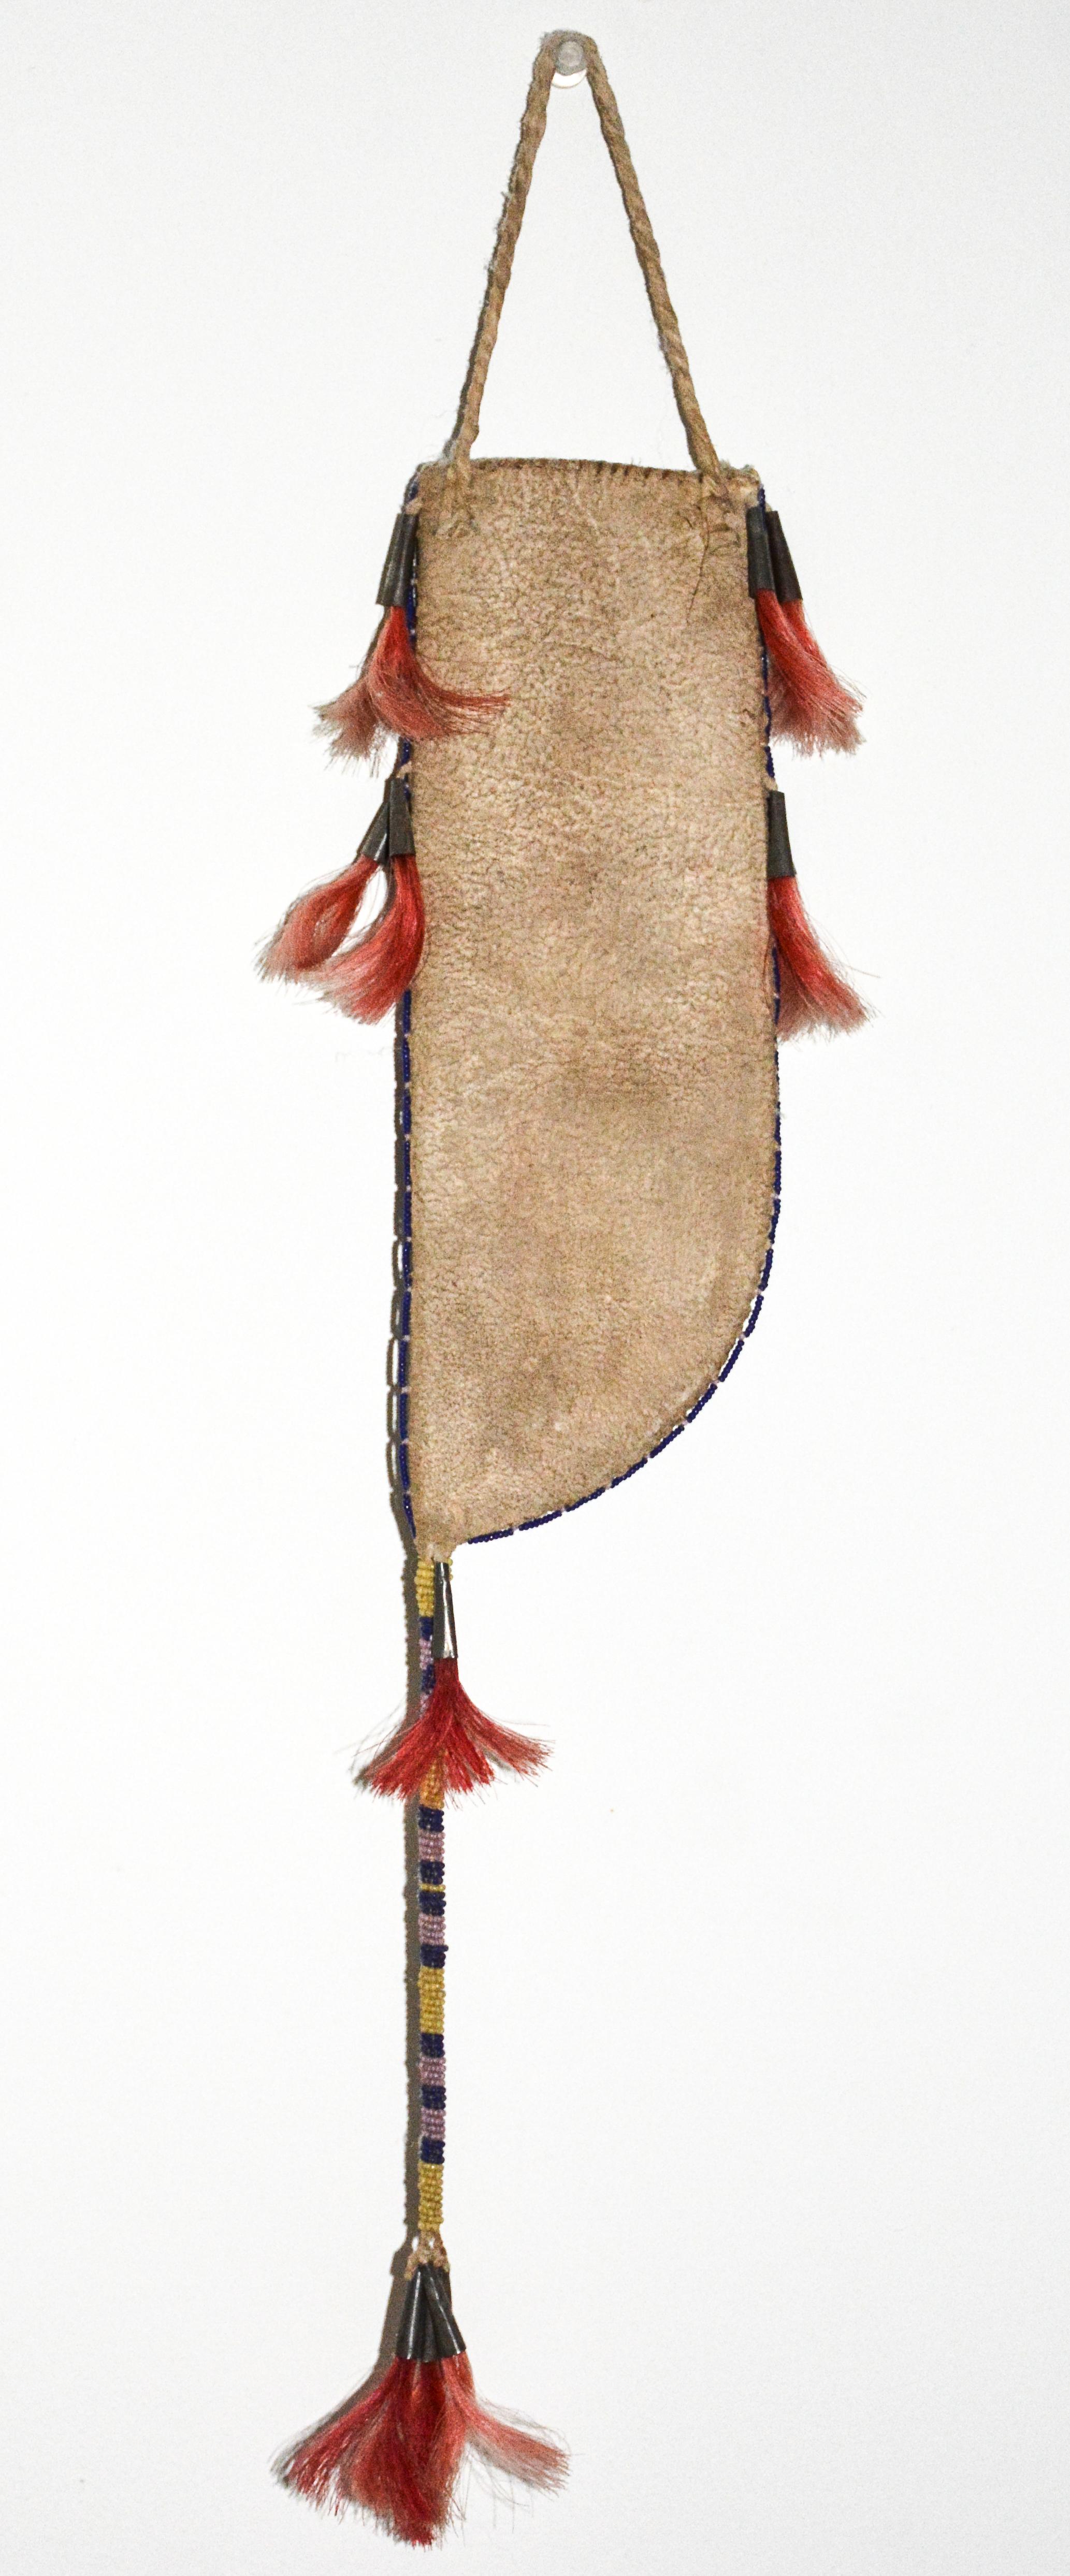 Beaded Knife Sheath

Plains

1930s

Cut glass trade beads, hide, sinew, tin cones, twisted hide, dyed horsehair.
Excellent original condition, some miner fading of the dyed horsehair.
 